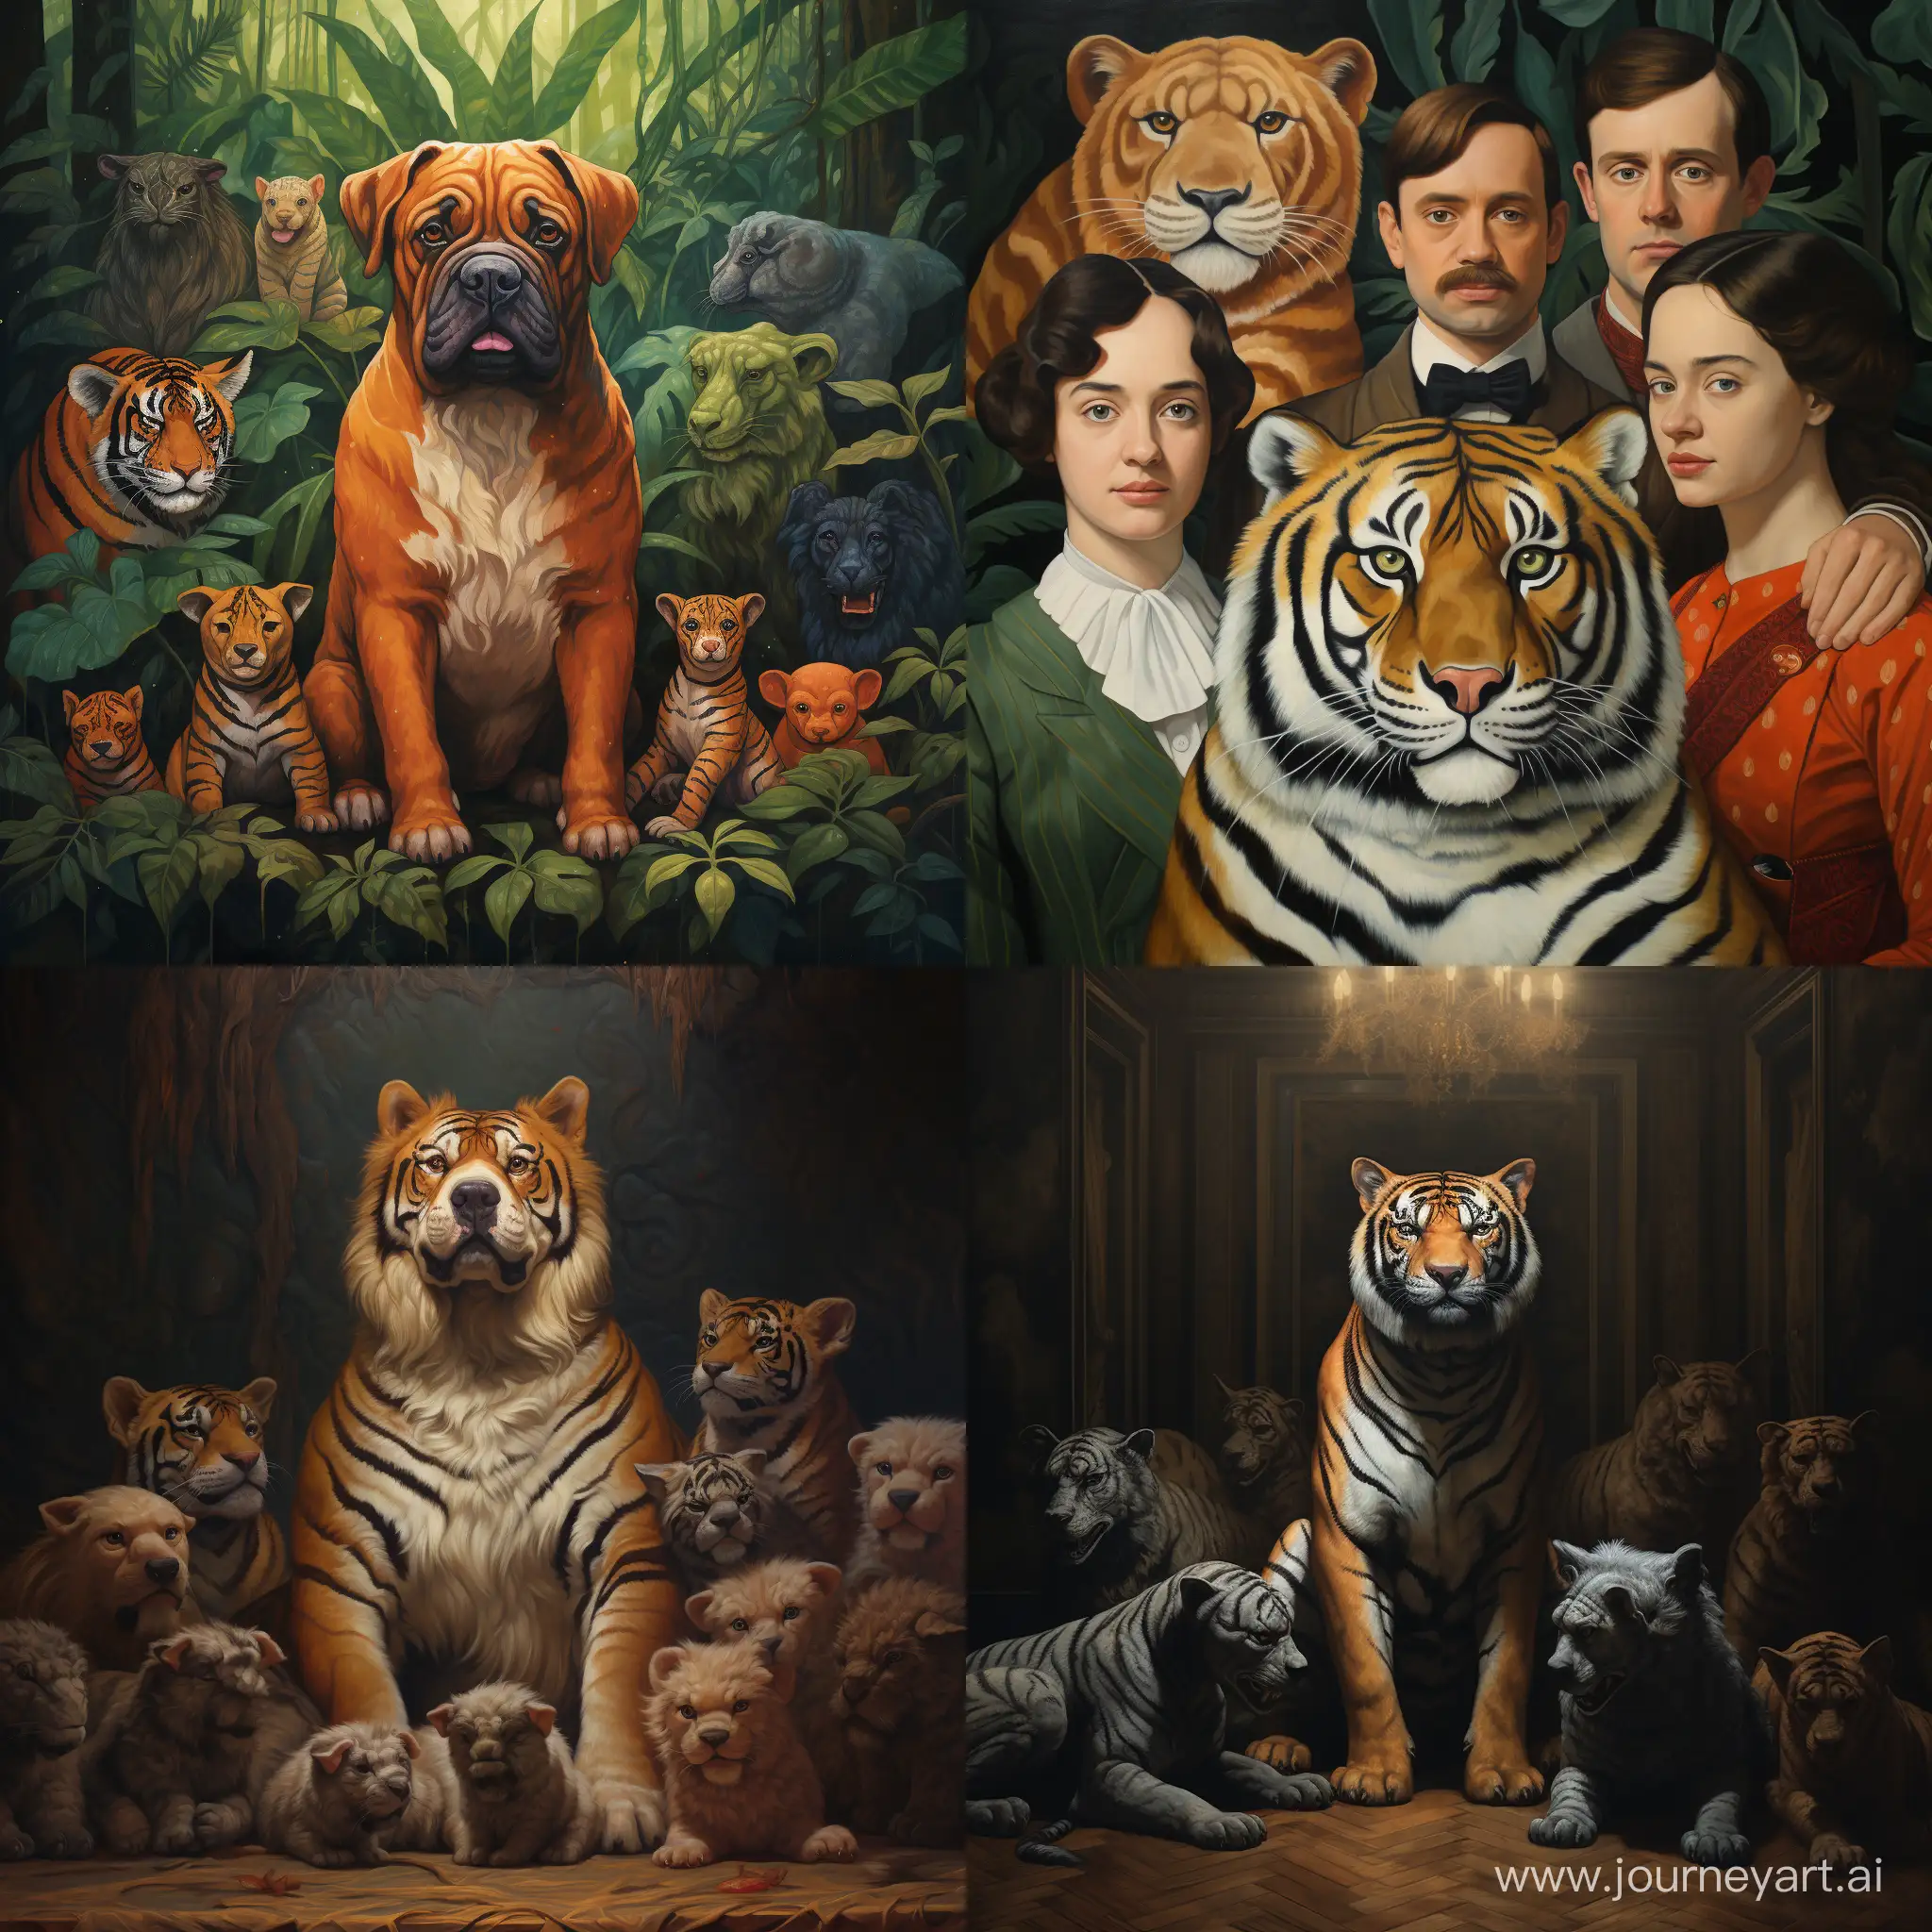 Adorable-Dog-Embraced-by-Tiger-Family-in-a-Whimsical-Encounter